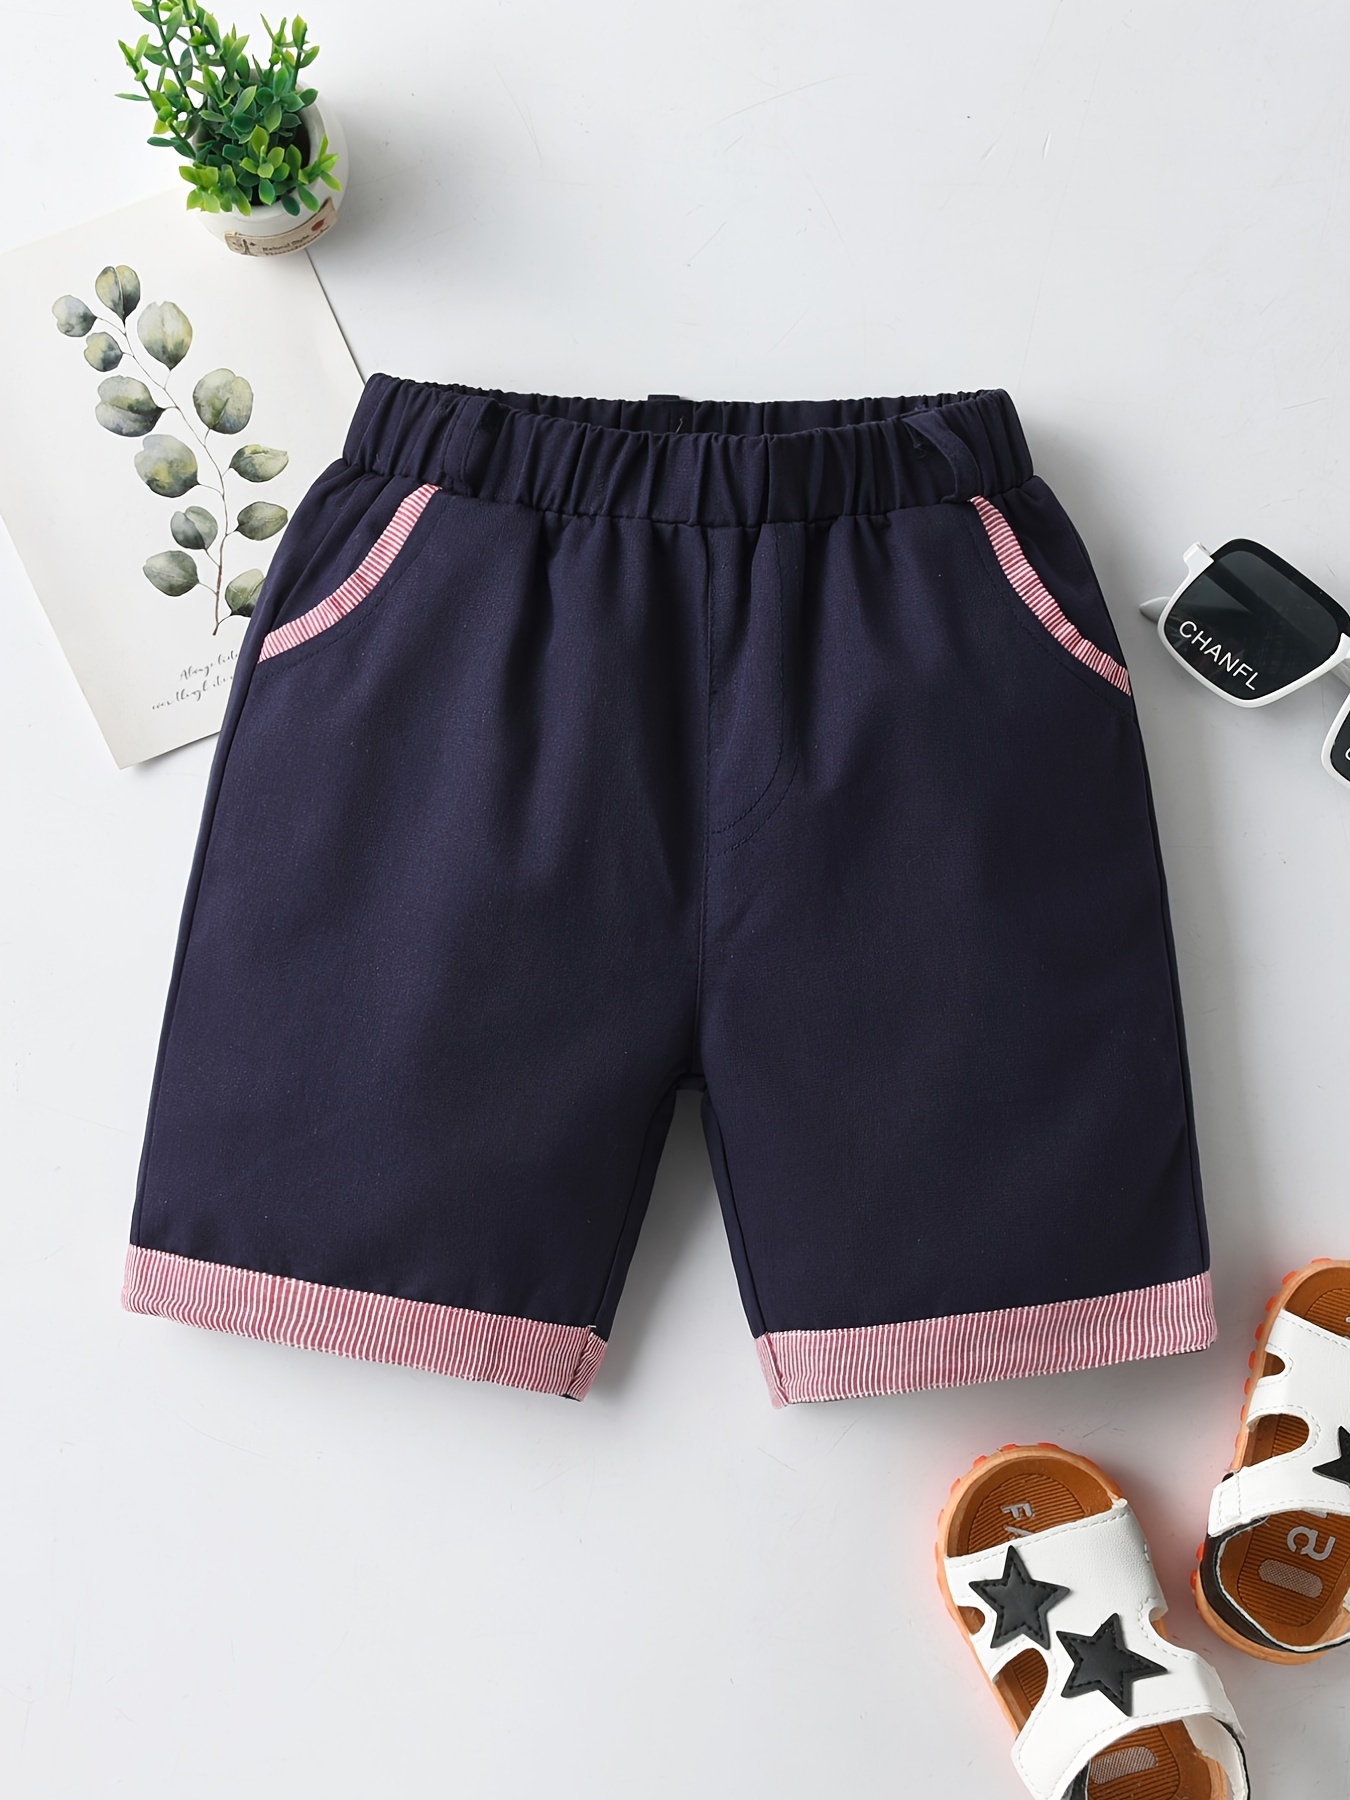 Summer Comfortable Cotton Bottom For Girls, Cotton Pants Design For Ladies